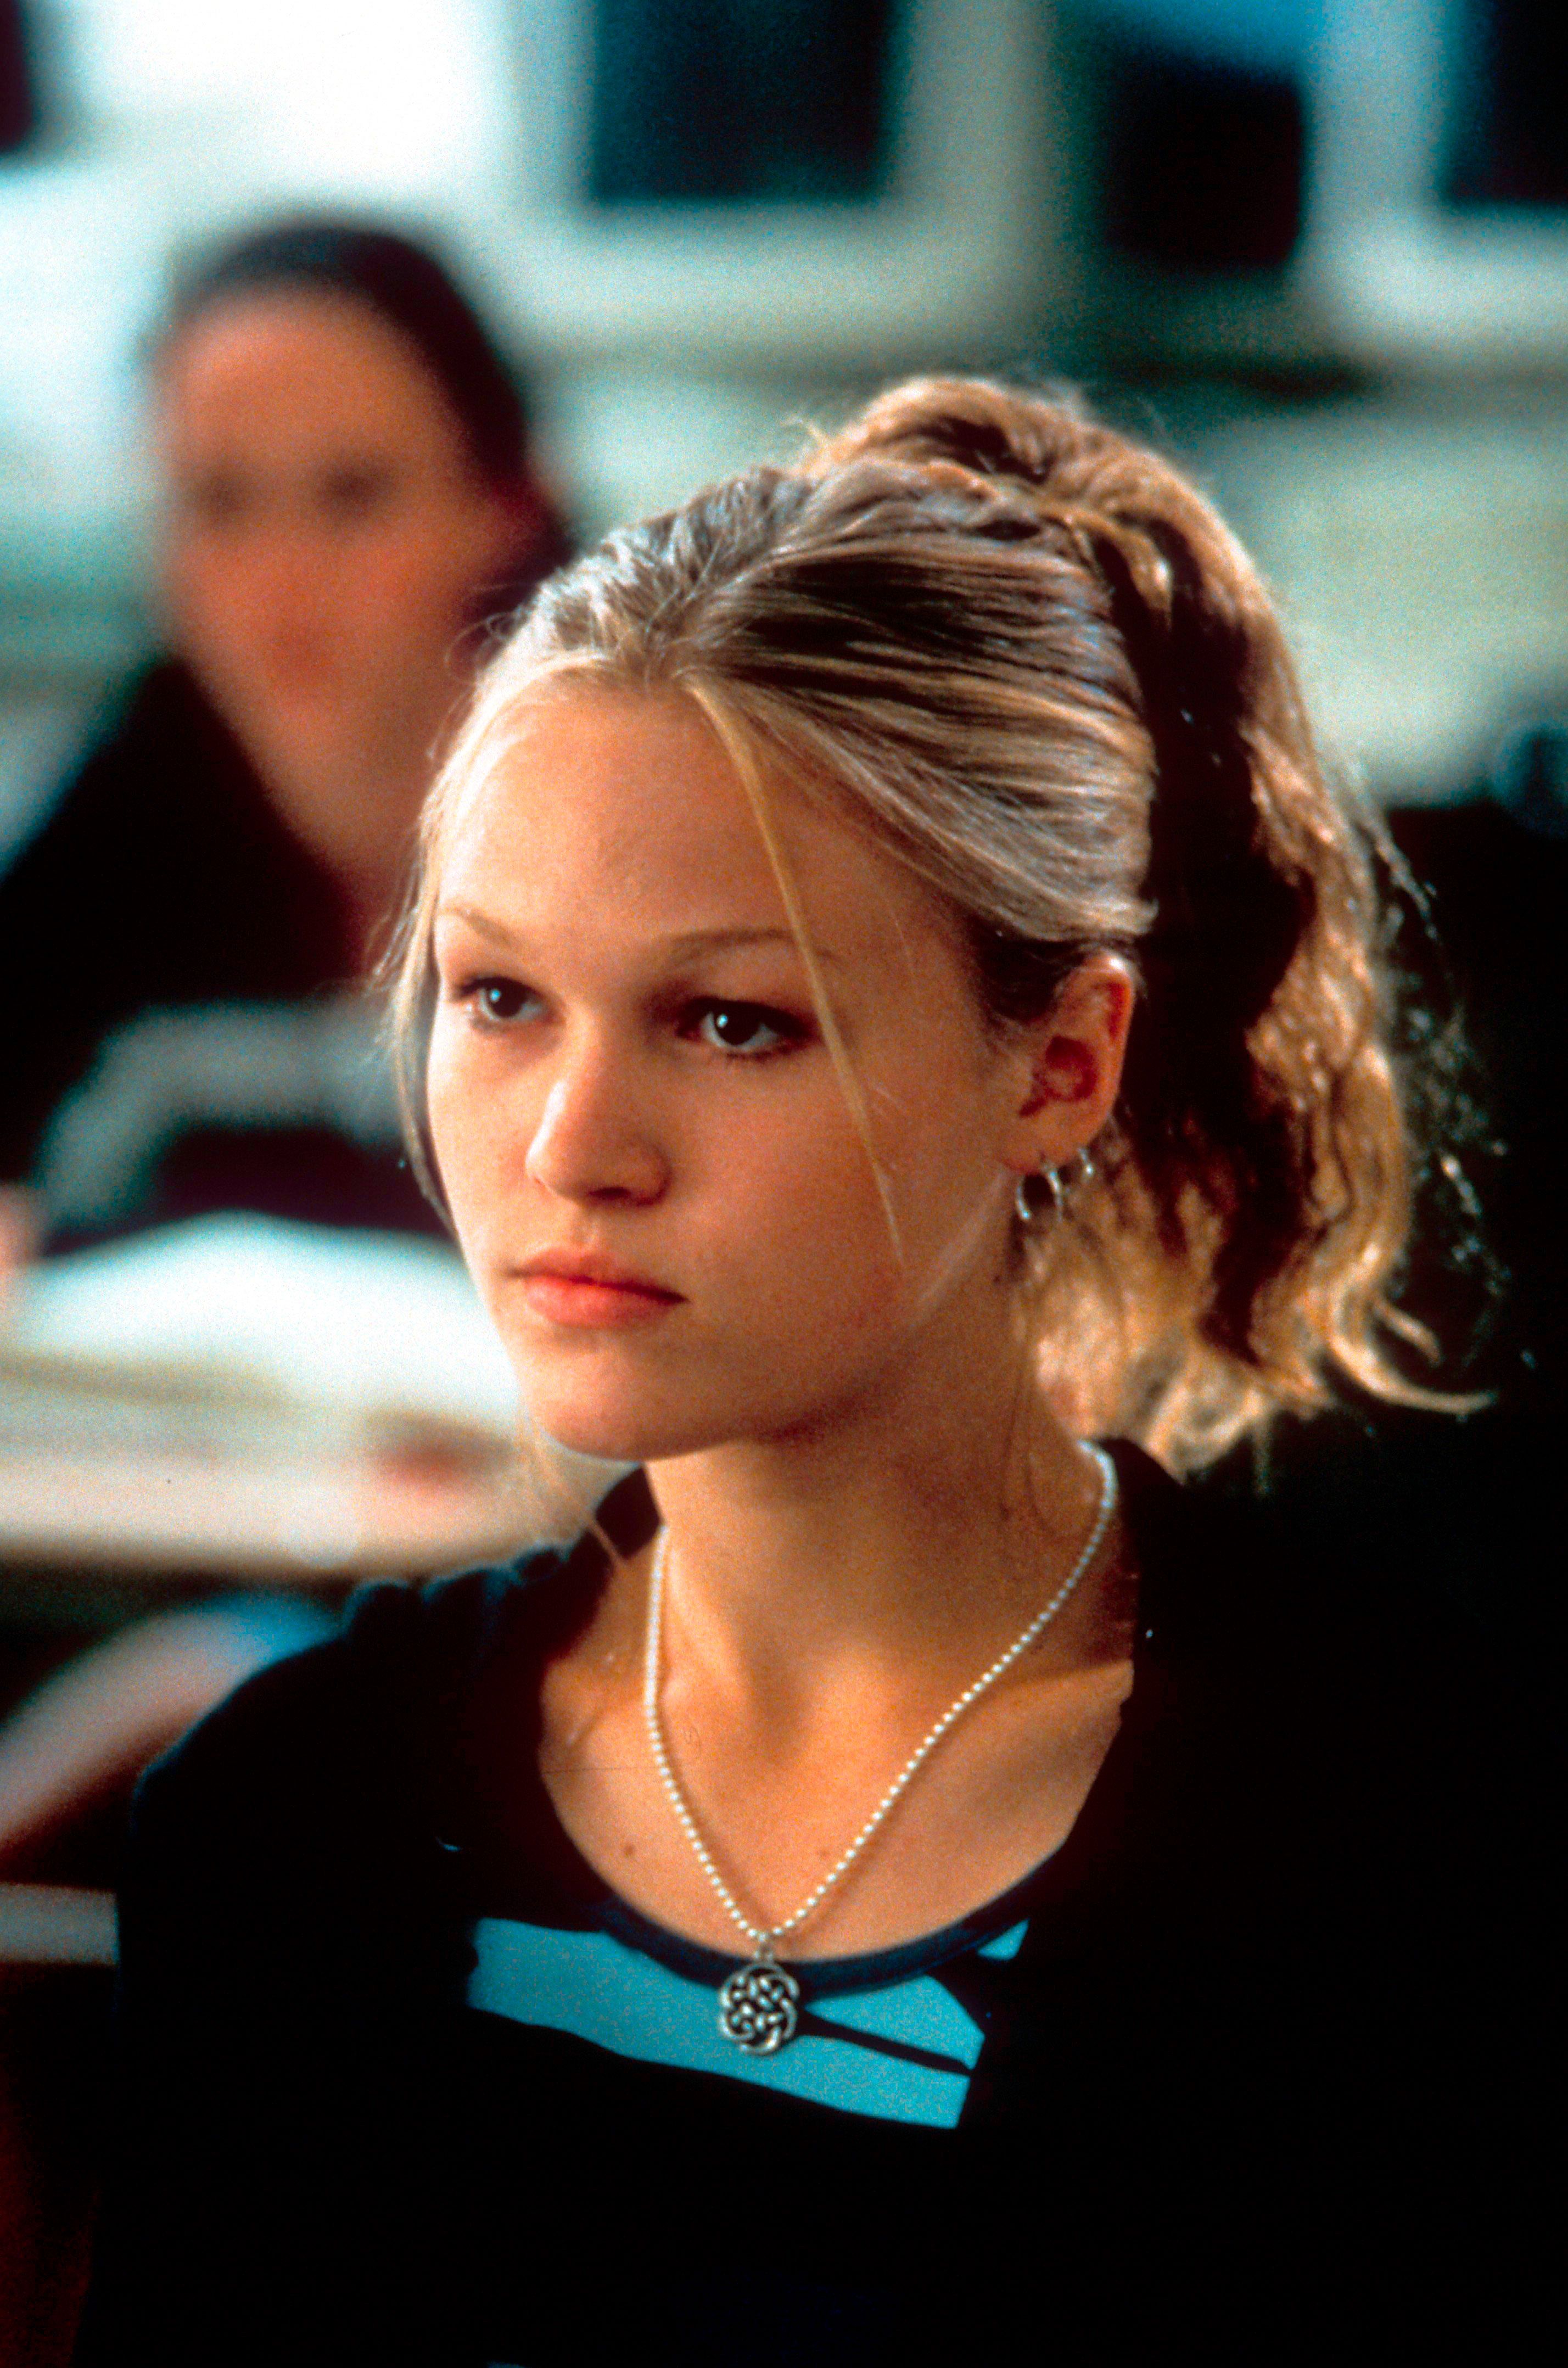 10 Things I Hate About You: Julia Stiles reveals feminist moment from set  of film